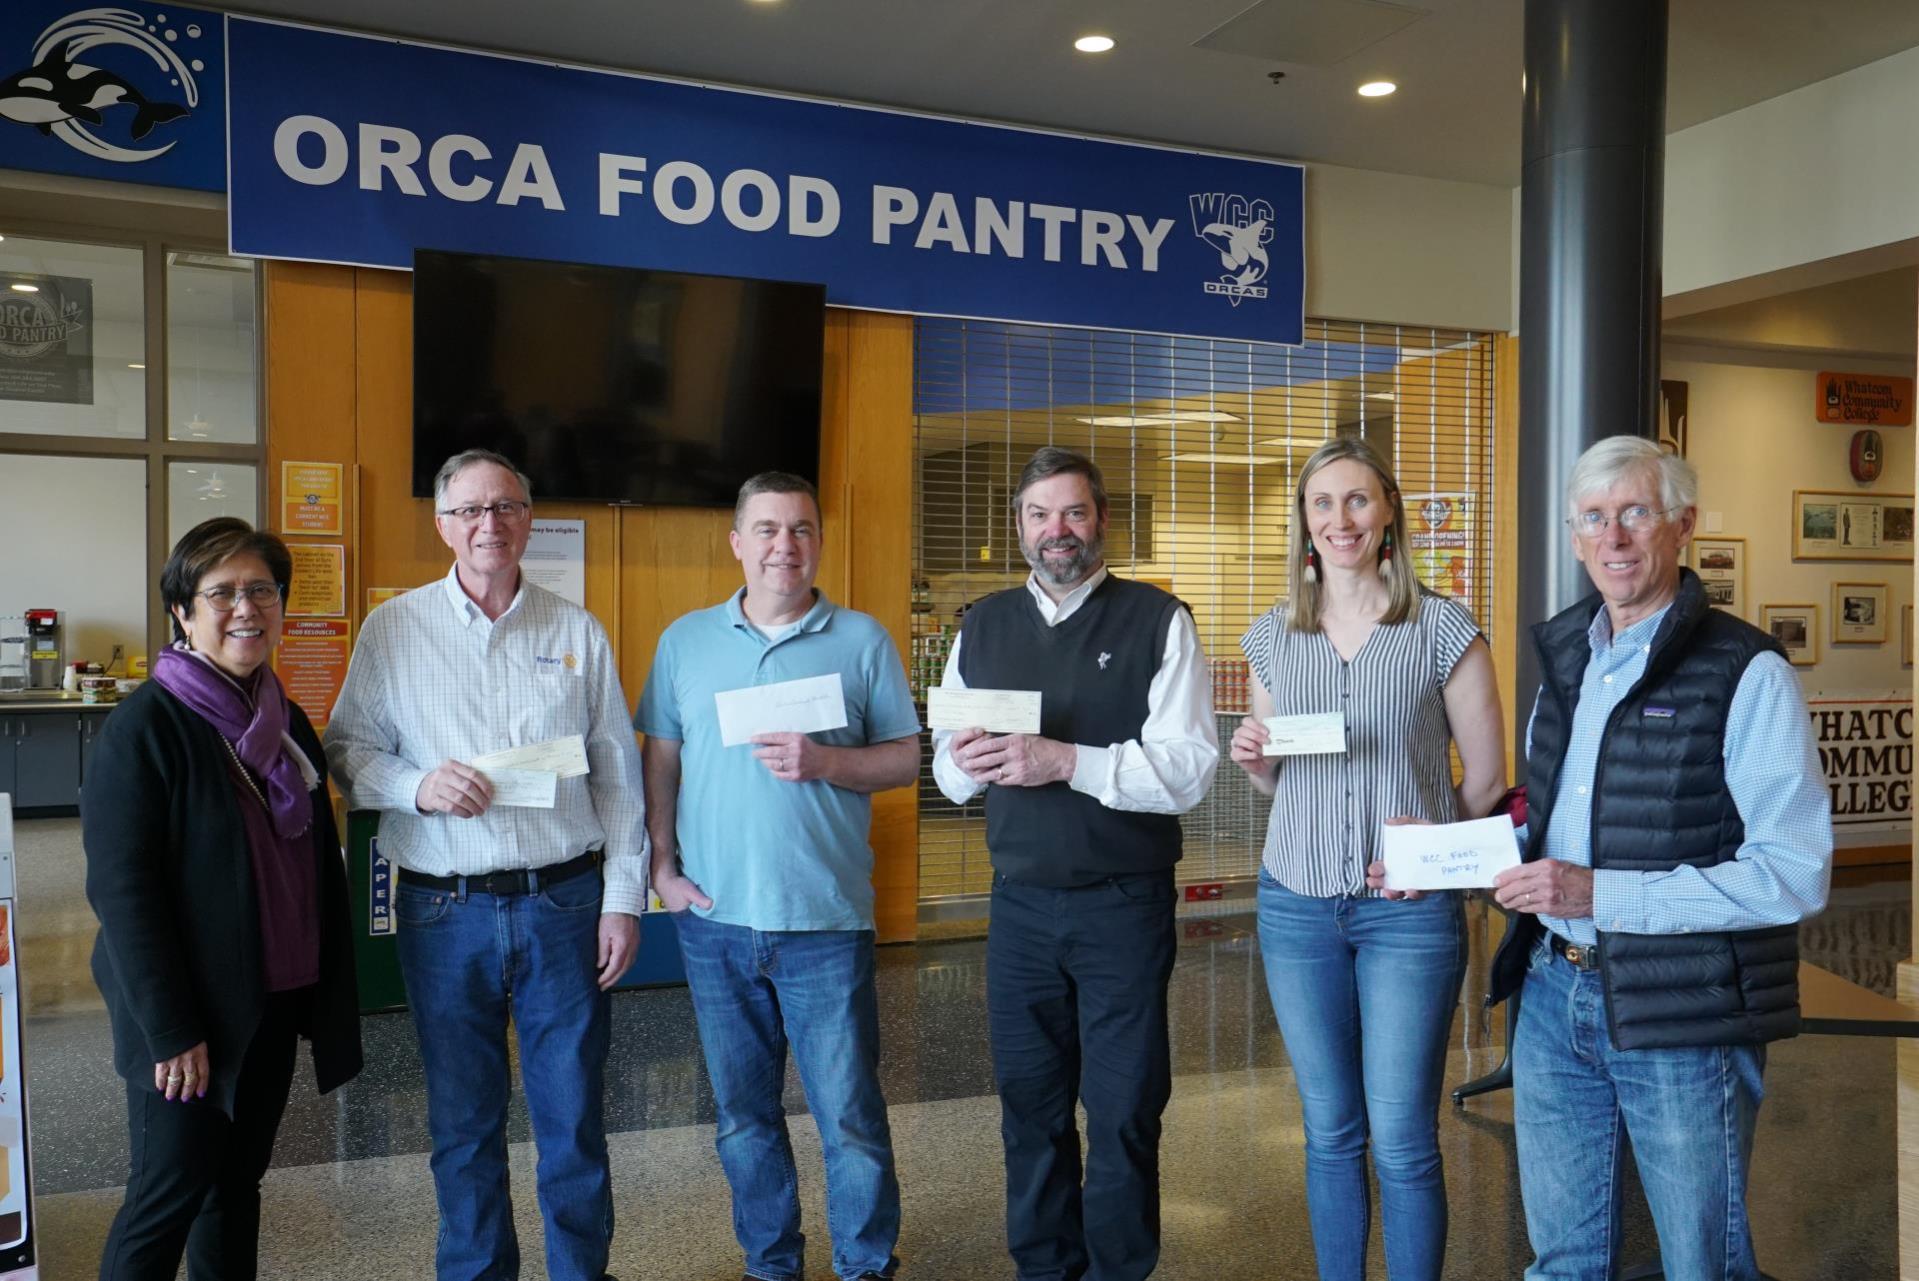 Rotary club members and President Kathi Hiyane-Brown pose infront of Orca Food Pantry